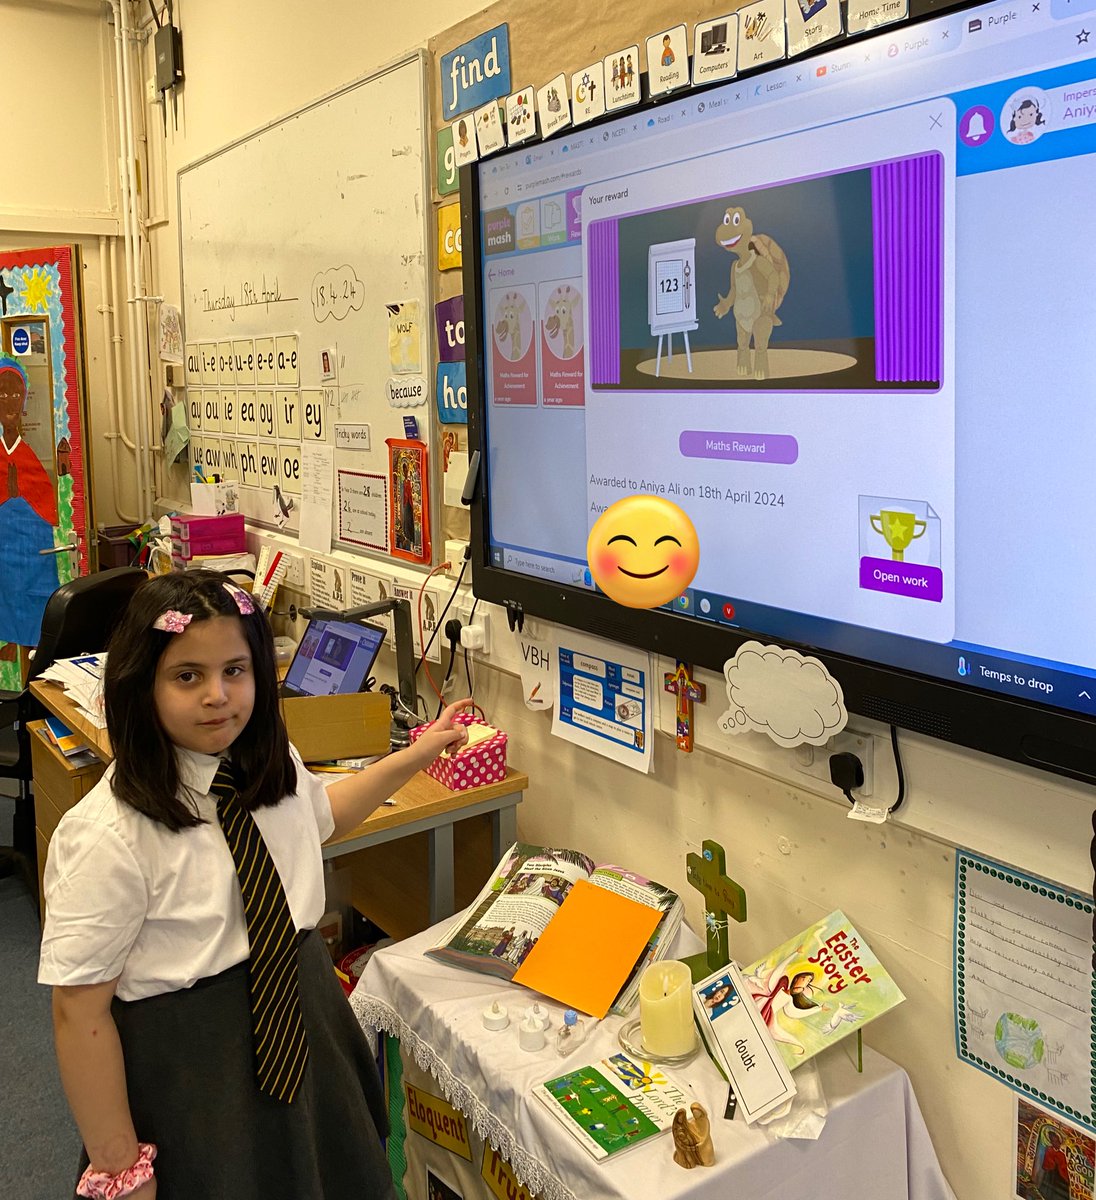 We saved our work, handed it in and opened up our feedback and awards too! @purpleMash 💜#computinghfb10 @HolyFamilyScho1